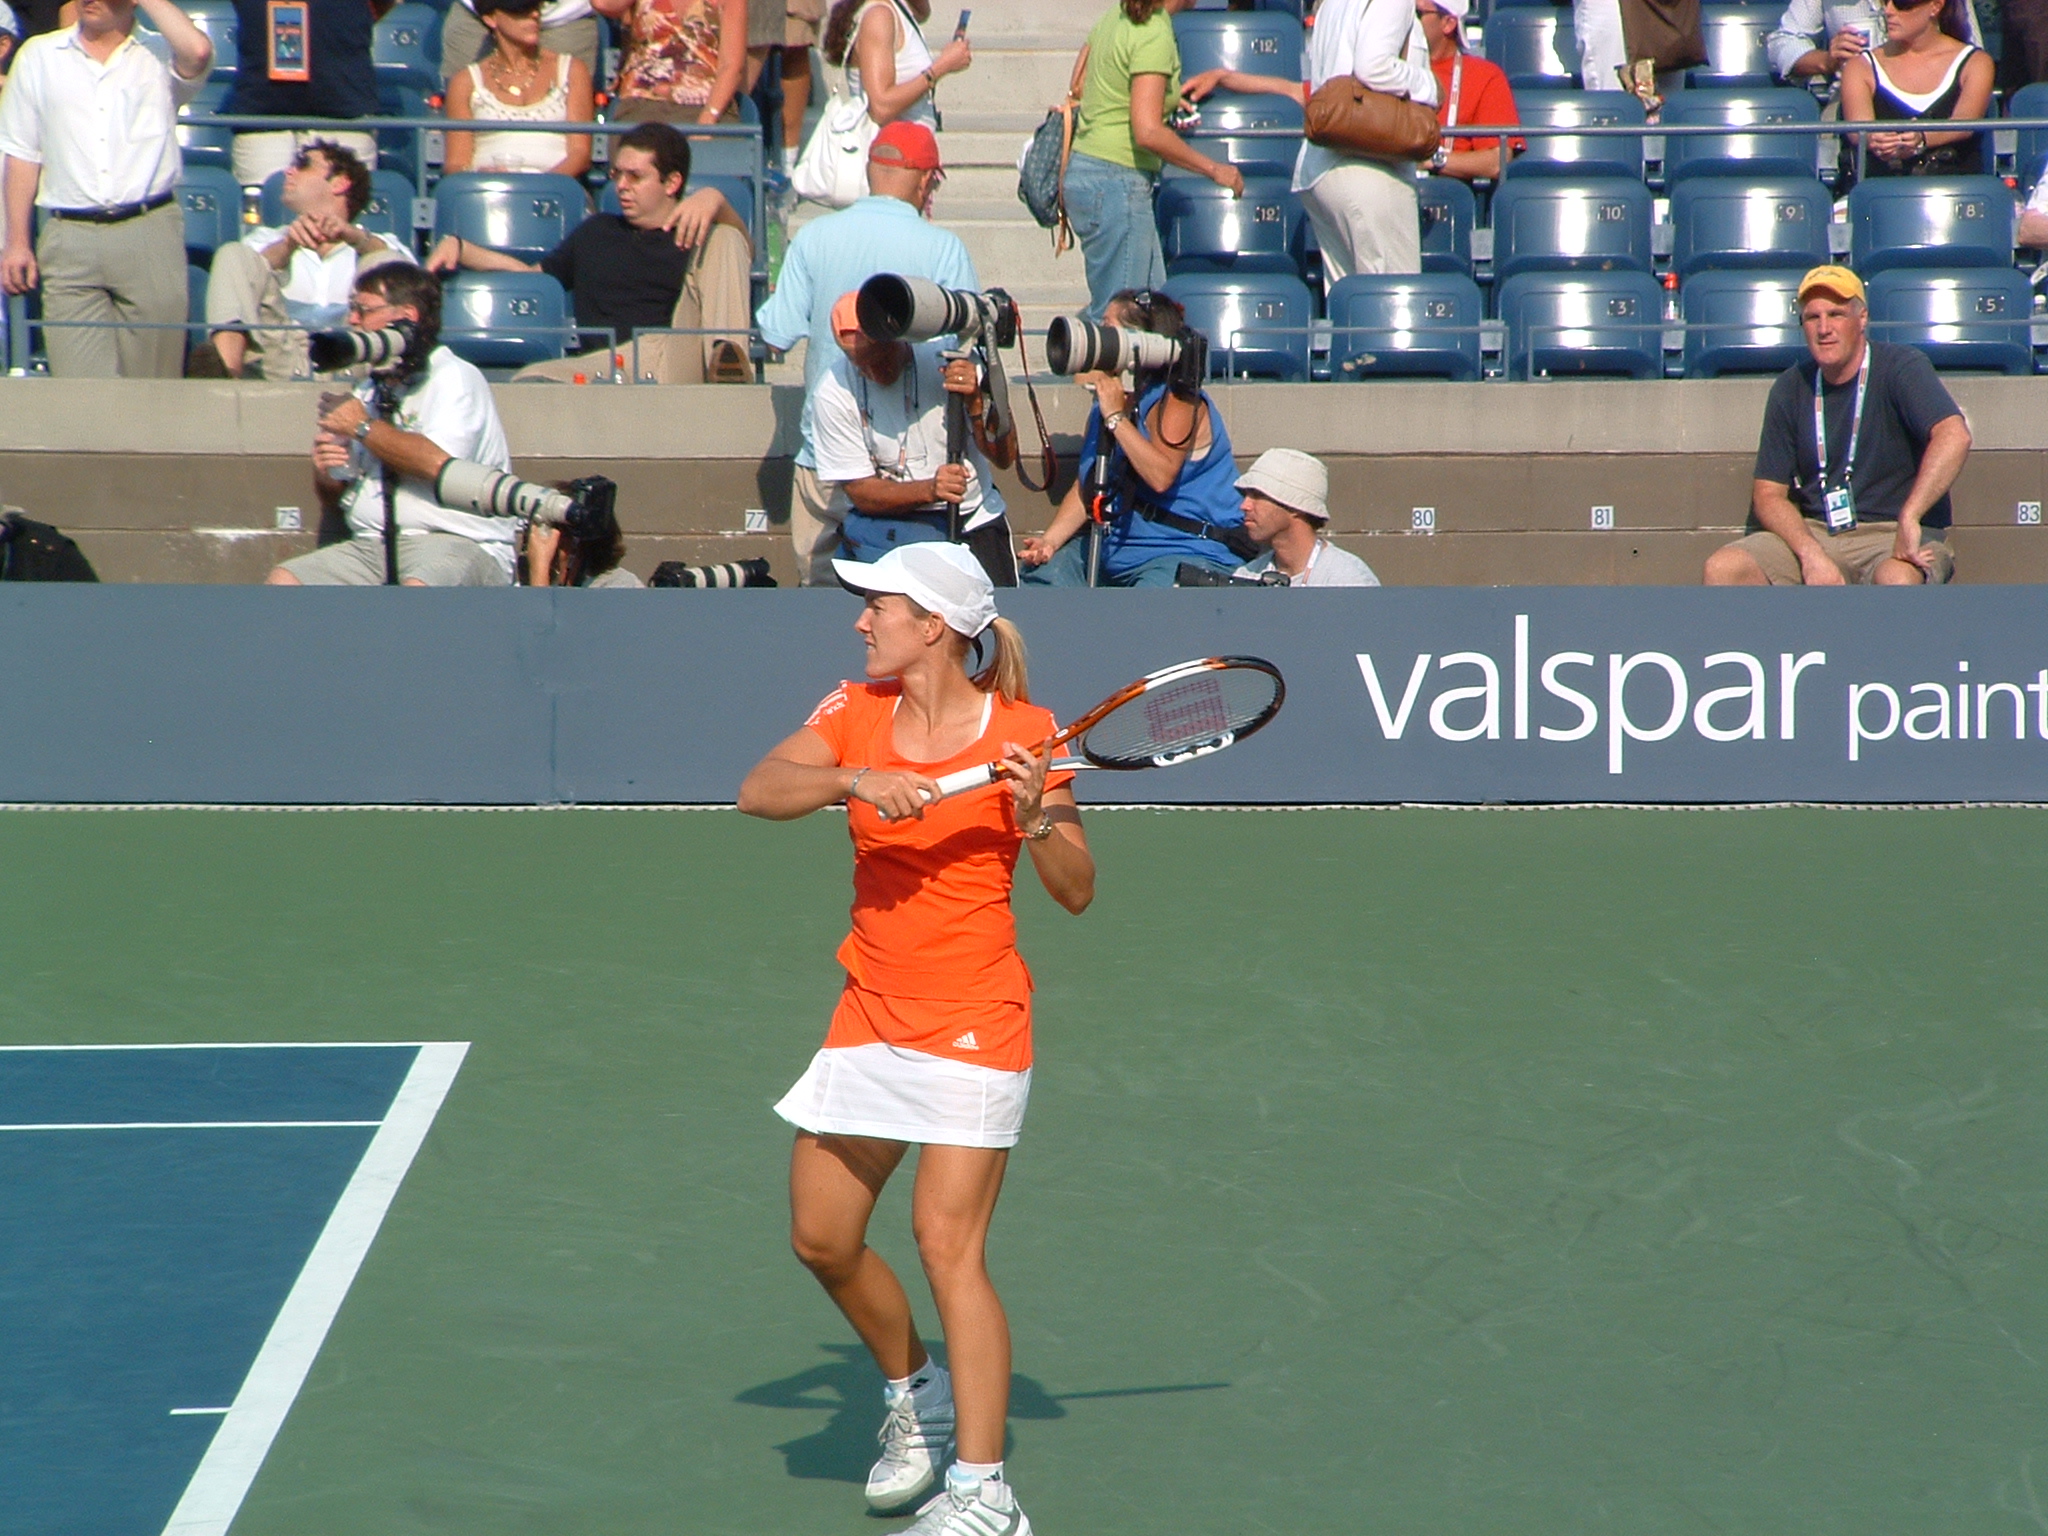 a tennis player with an orange shirt is playing tennis